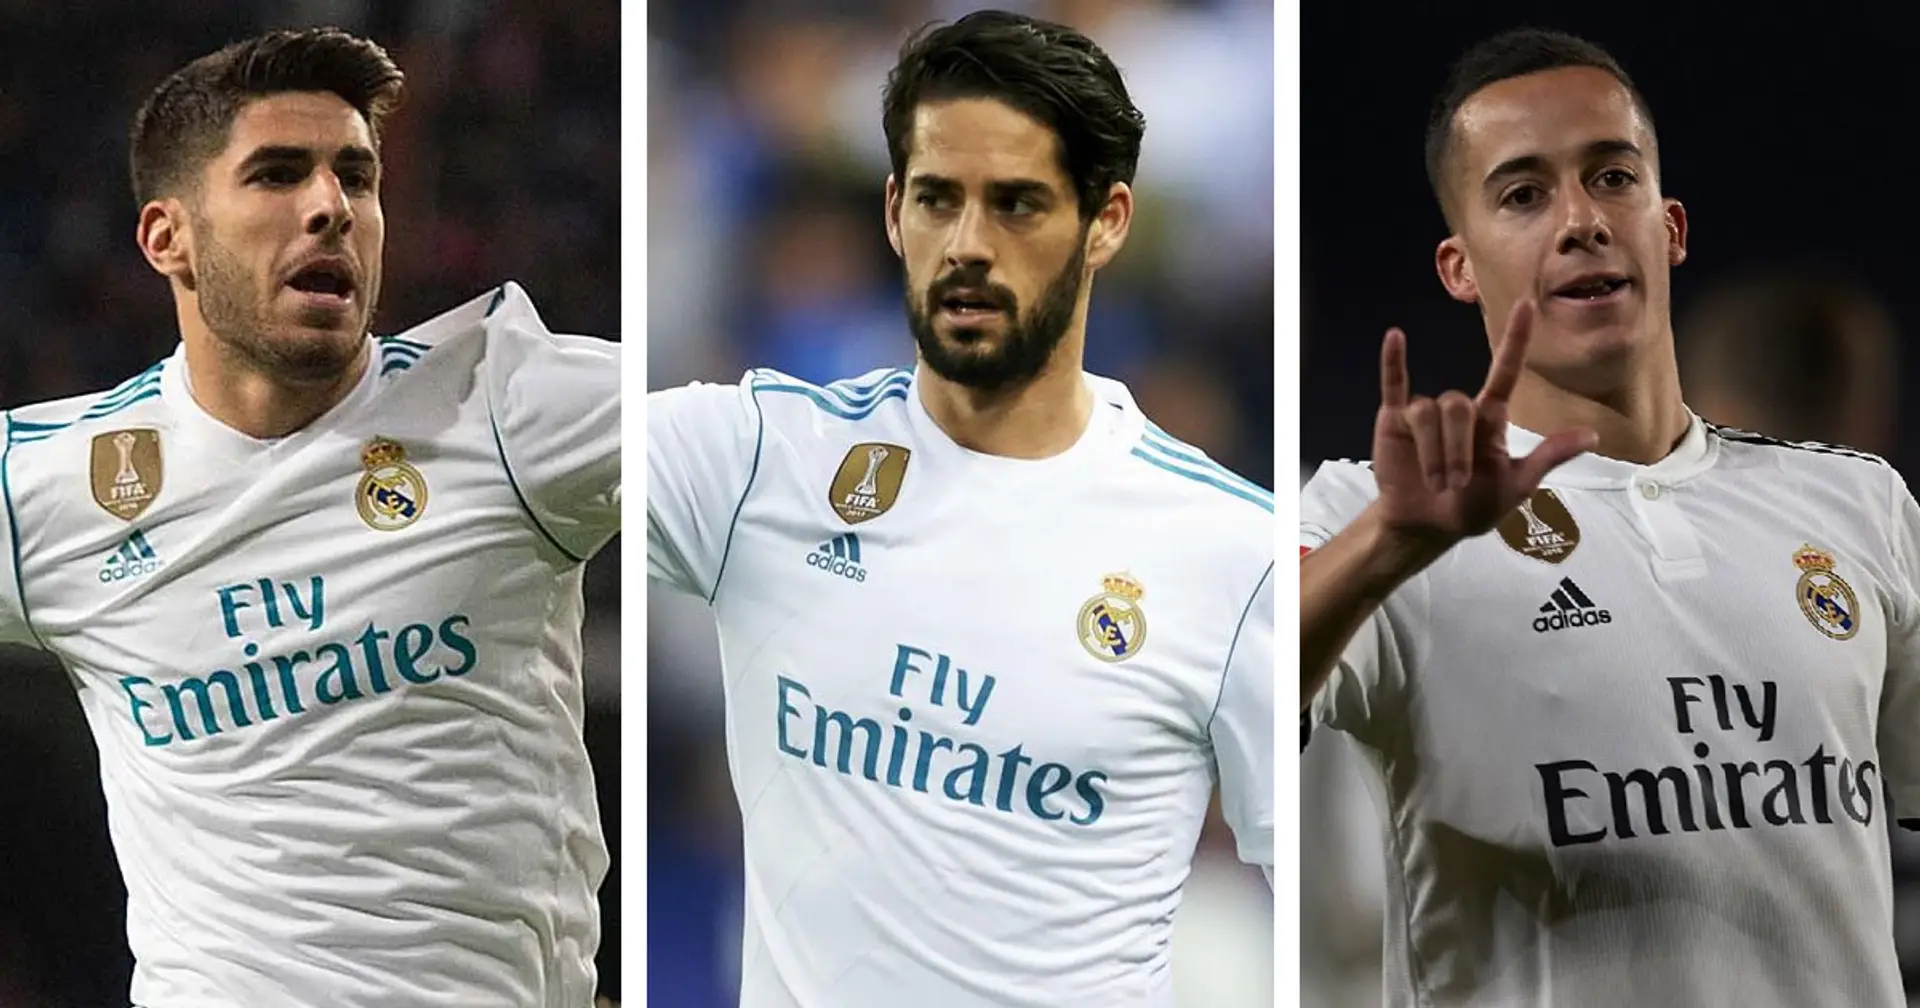 Isco a 'pathetic' playmaker, Asensio not even bench material, Vazquez good emergency option: fan comments on Madrid's underperforming trio